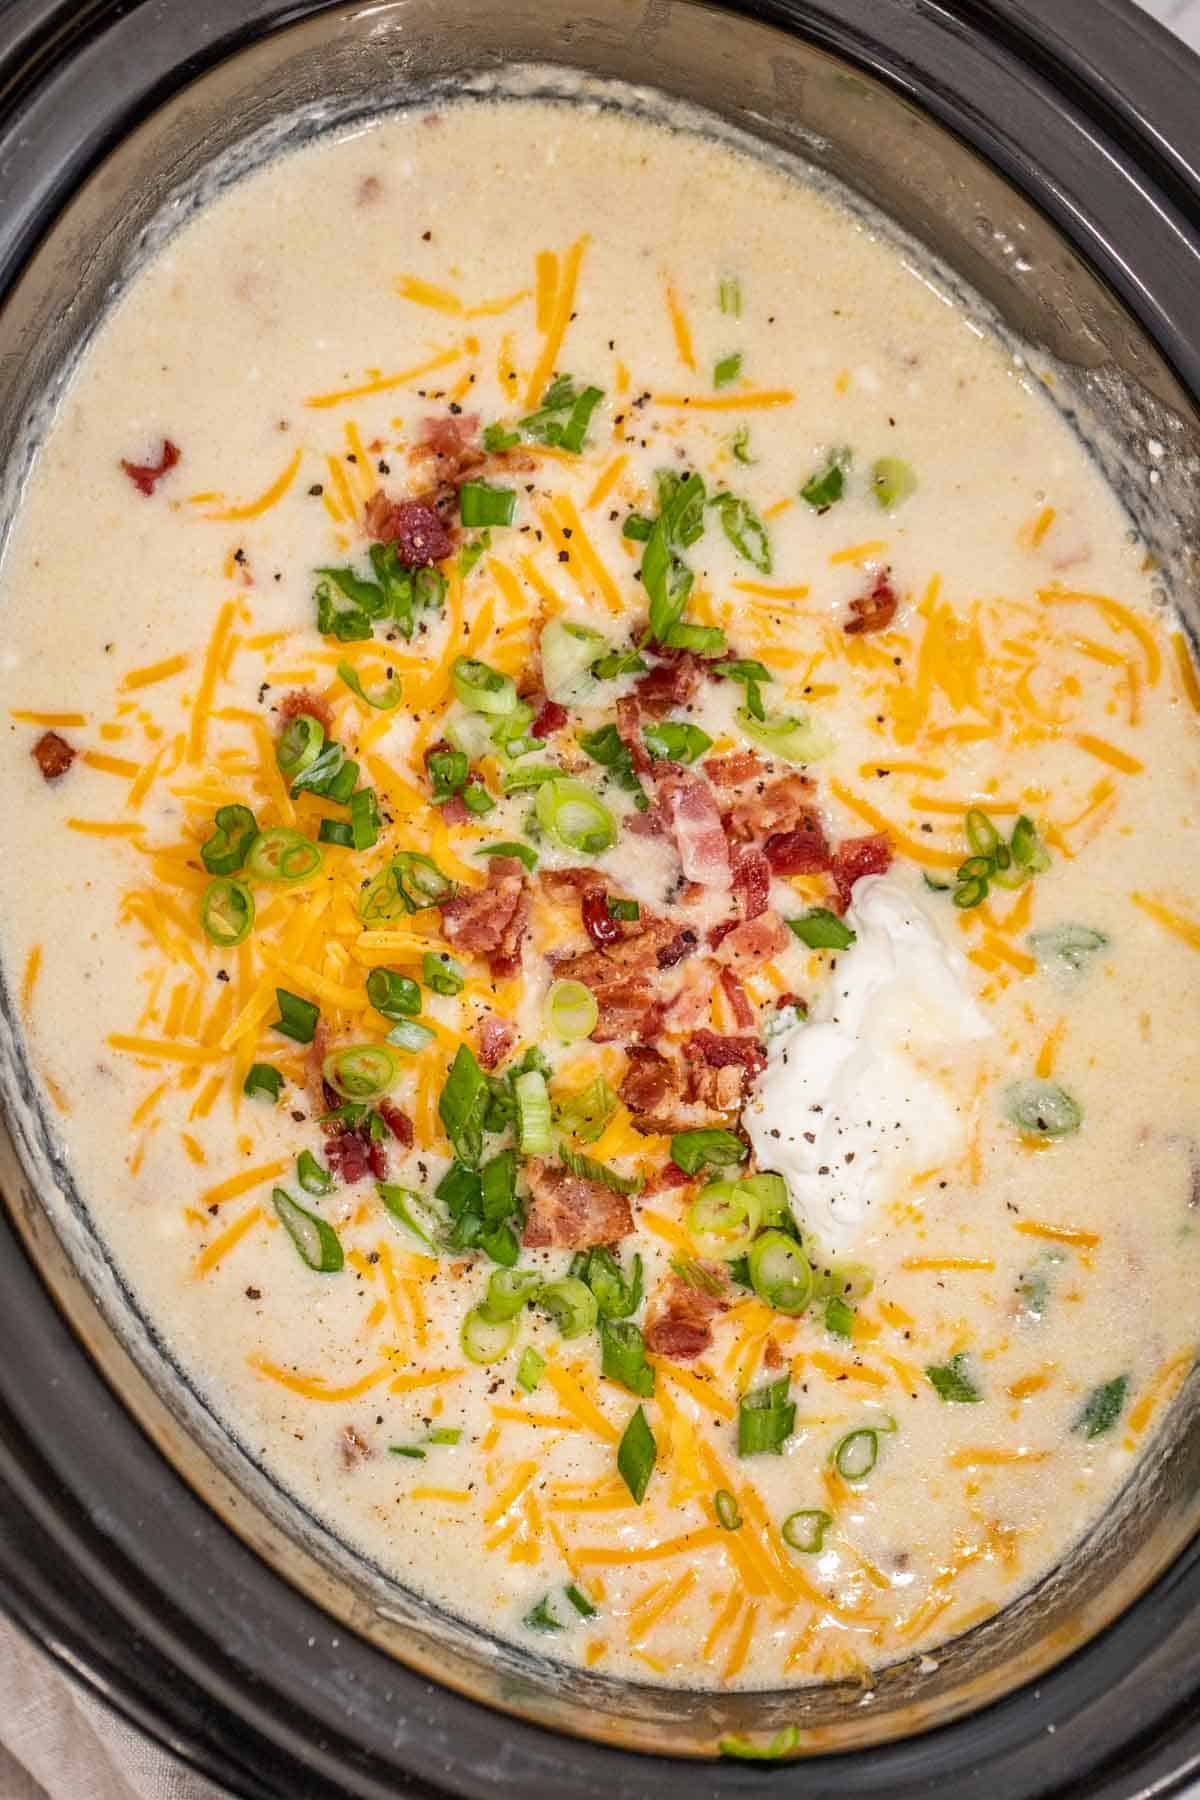 The finished potato soup topped with bacon, cheese, green onions, and sour cream.